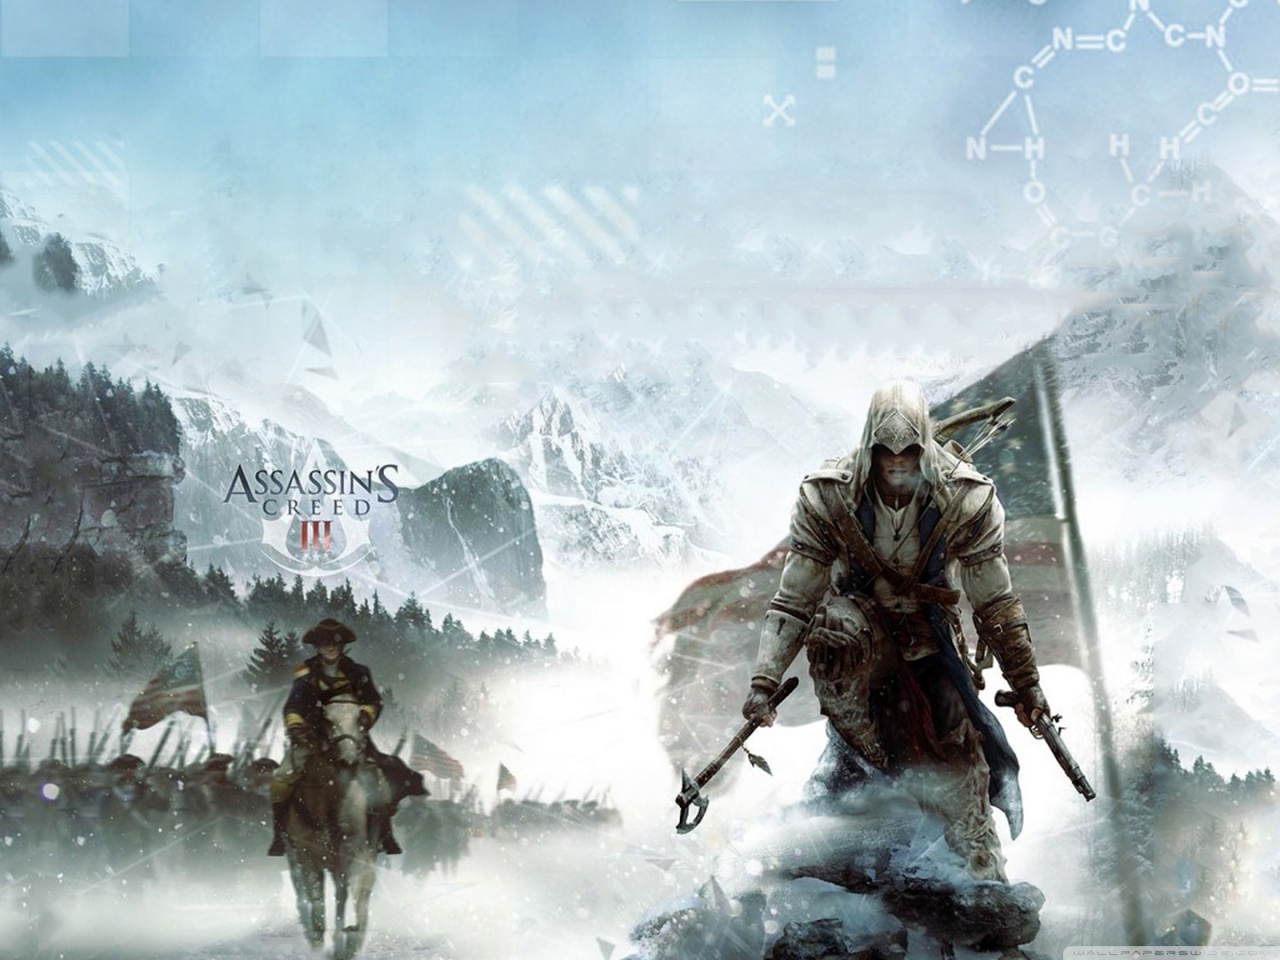 AC3] Connor Kenway | Assassins creed artwork, Assassins creed art,  Assassin's creed wallpaper